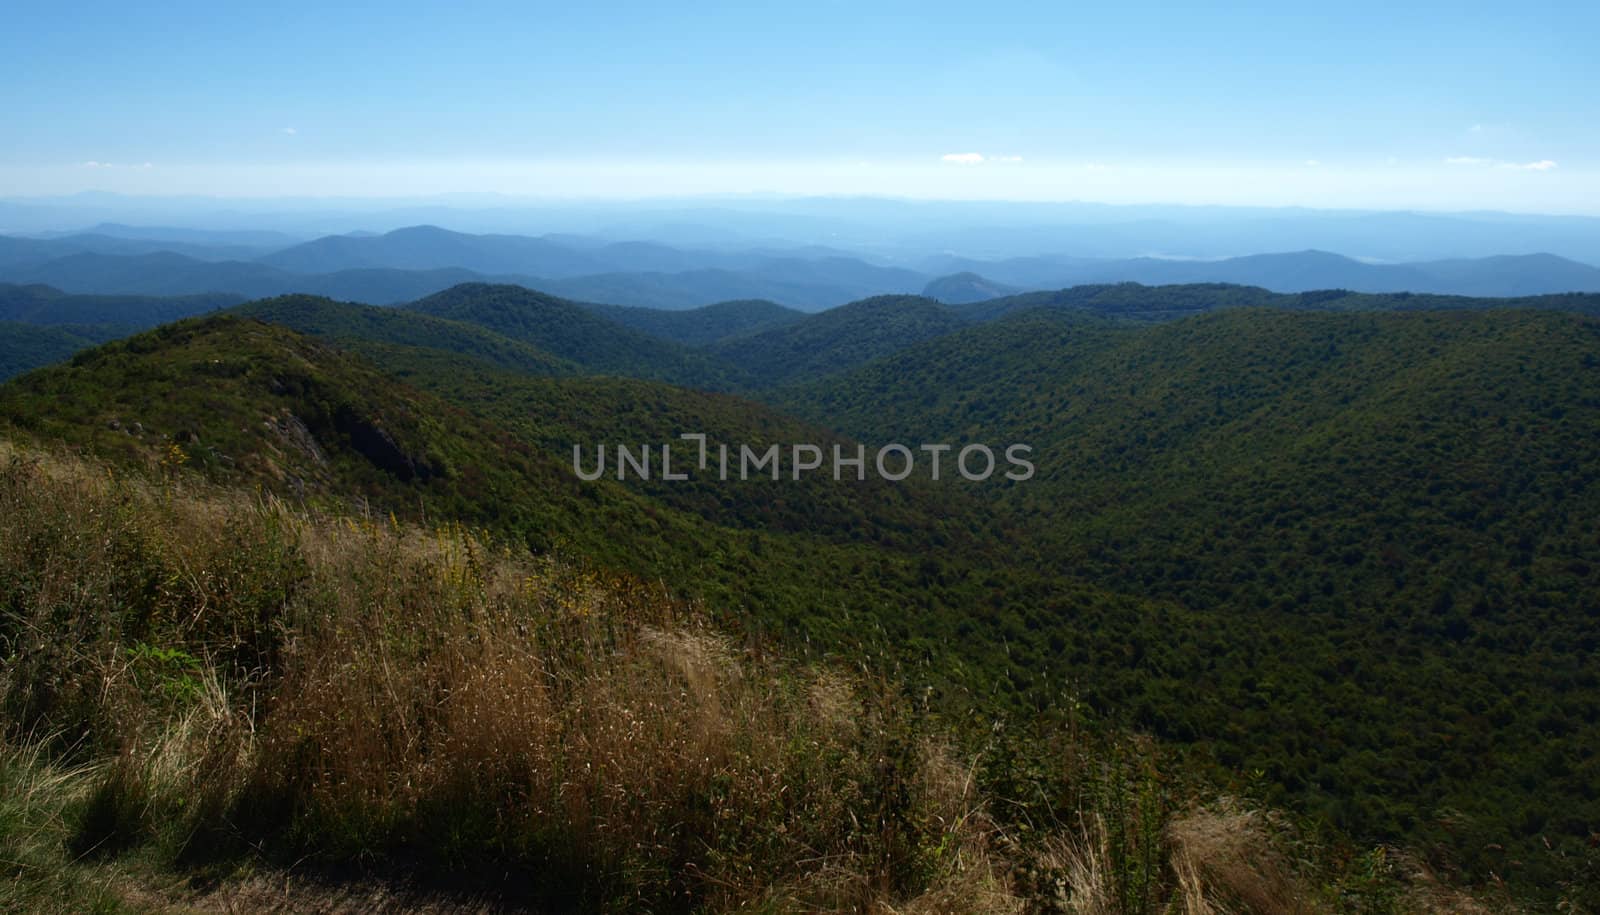 View along the Art Loeb Trail in the Shining Rock Area of the Pisgah Forest in North Carolina.